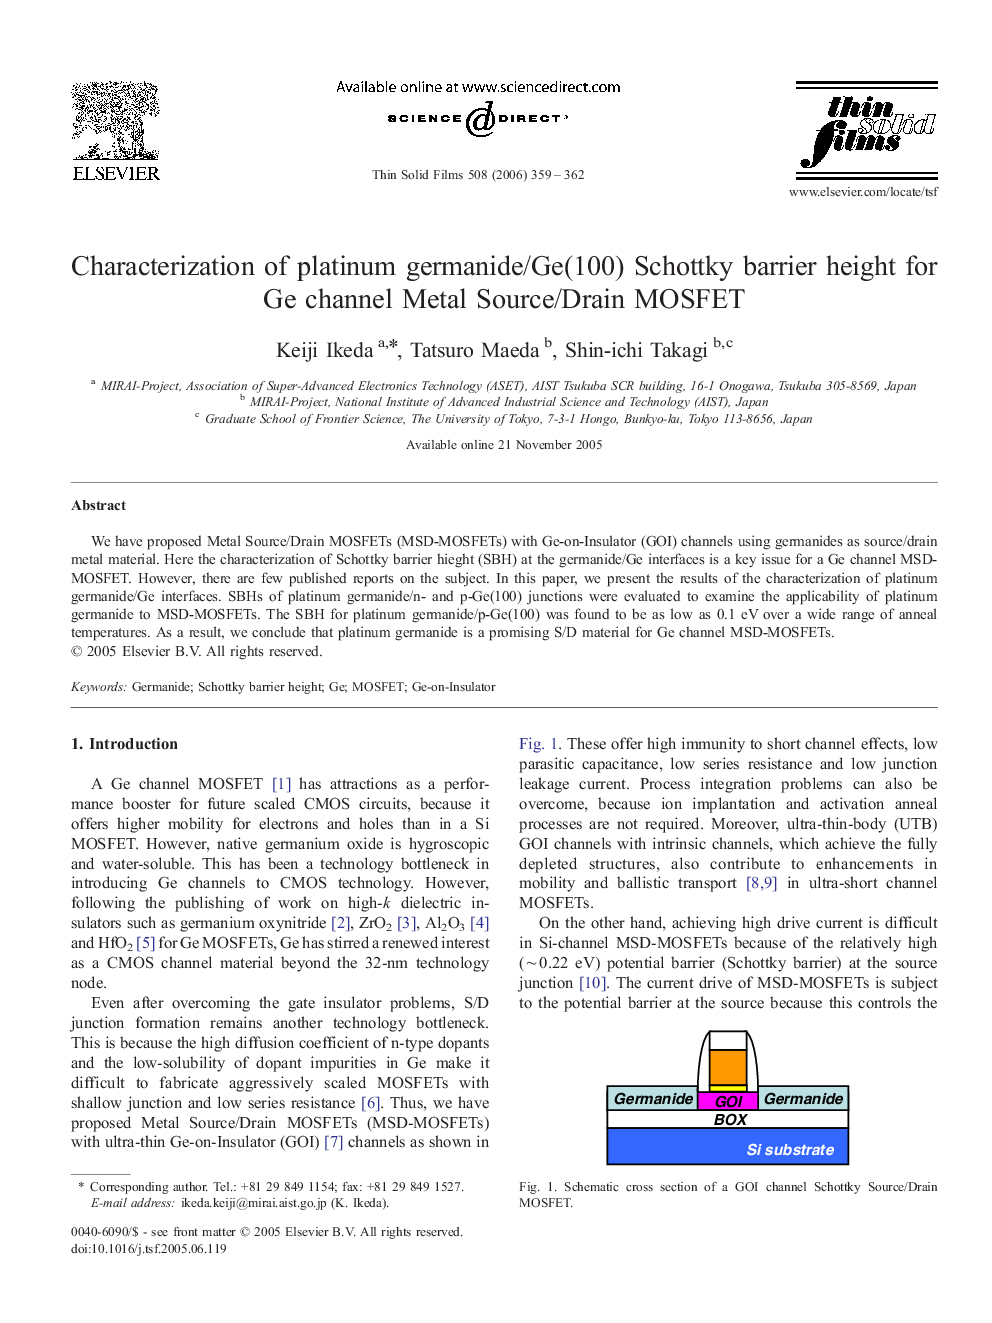 Characterization of platinum germanide/Ge(100) Schottky barrier height for Ge channel Metal Source/Drain MOSFET